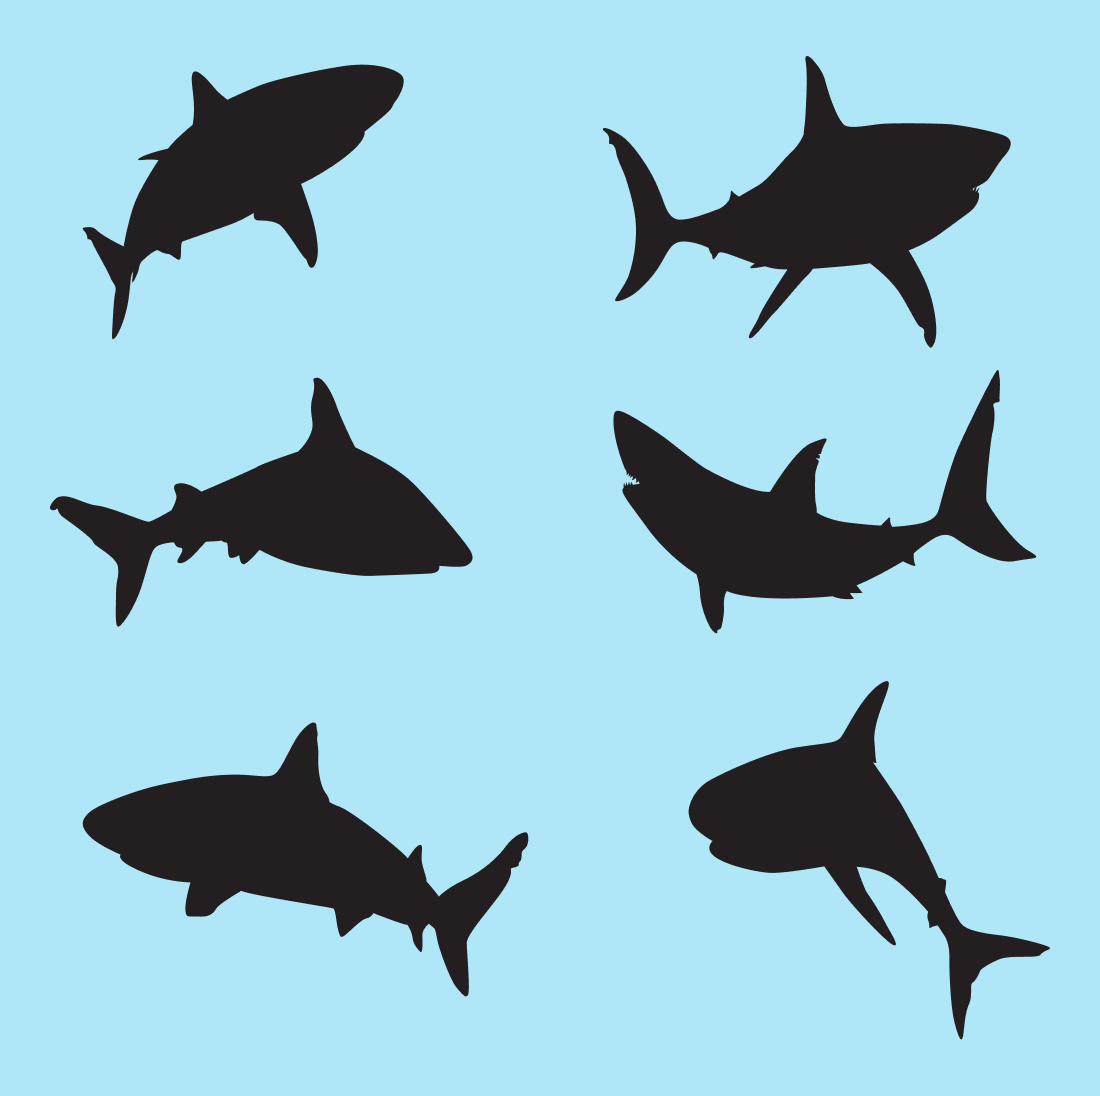 Image of silhouettes of predatory sharks on a blue background.